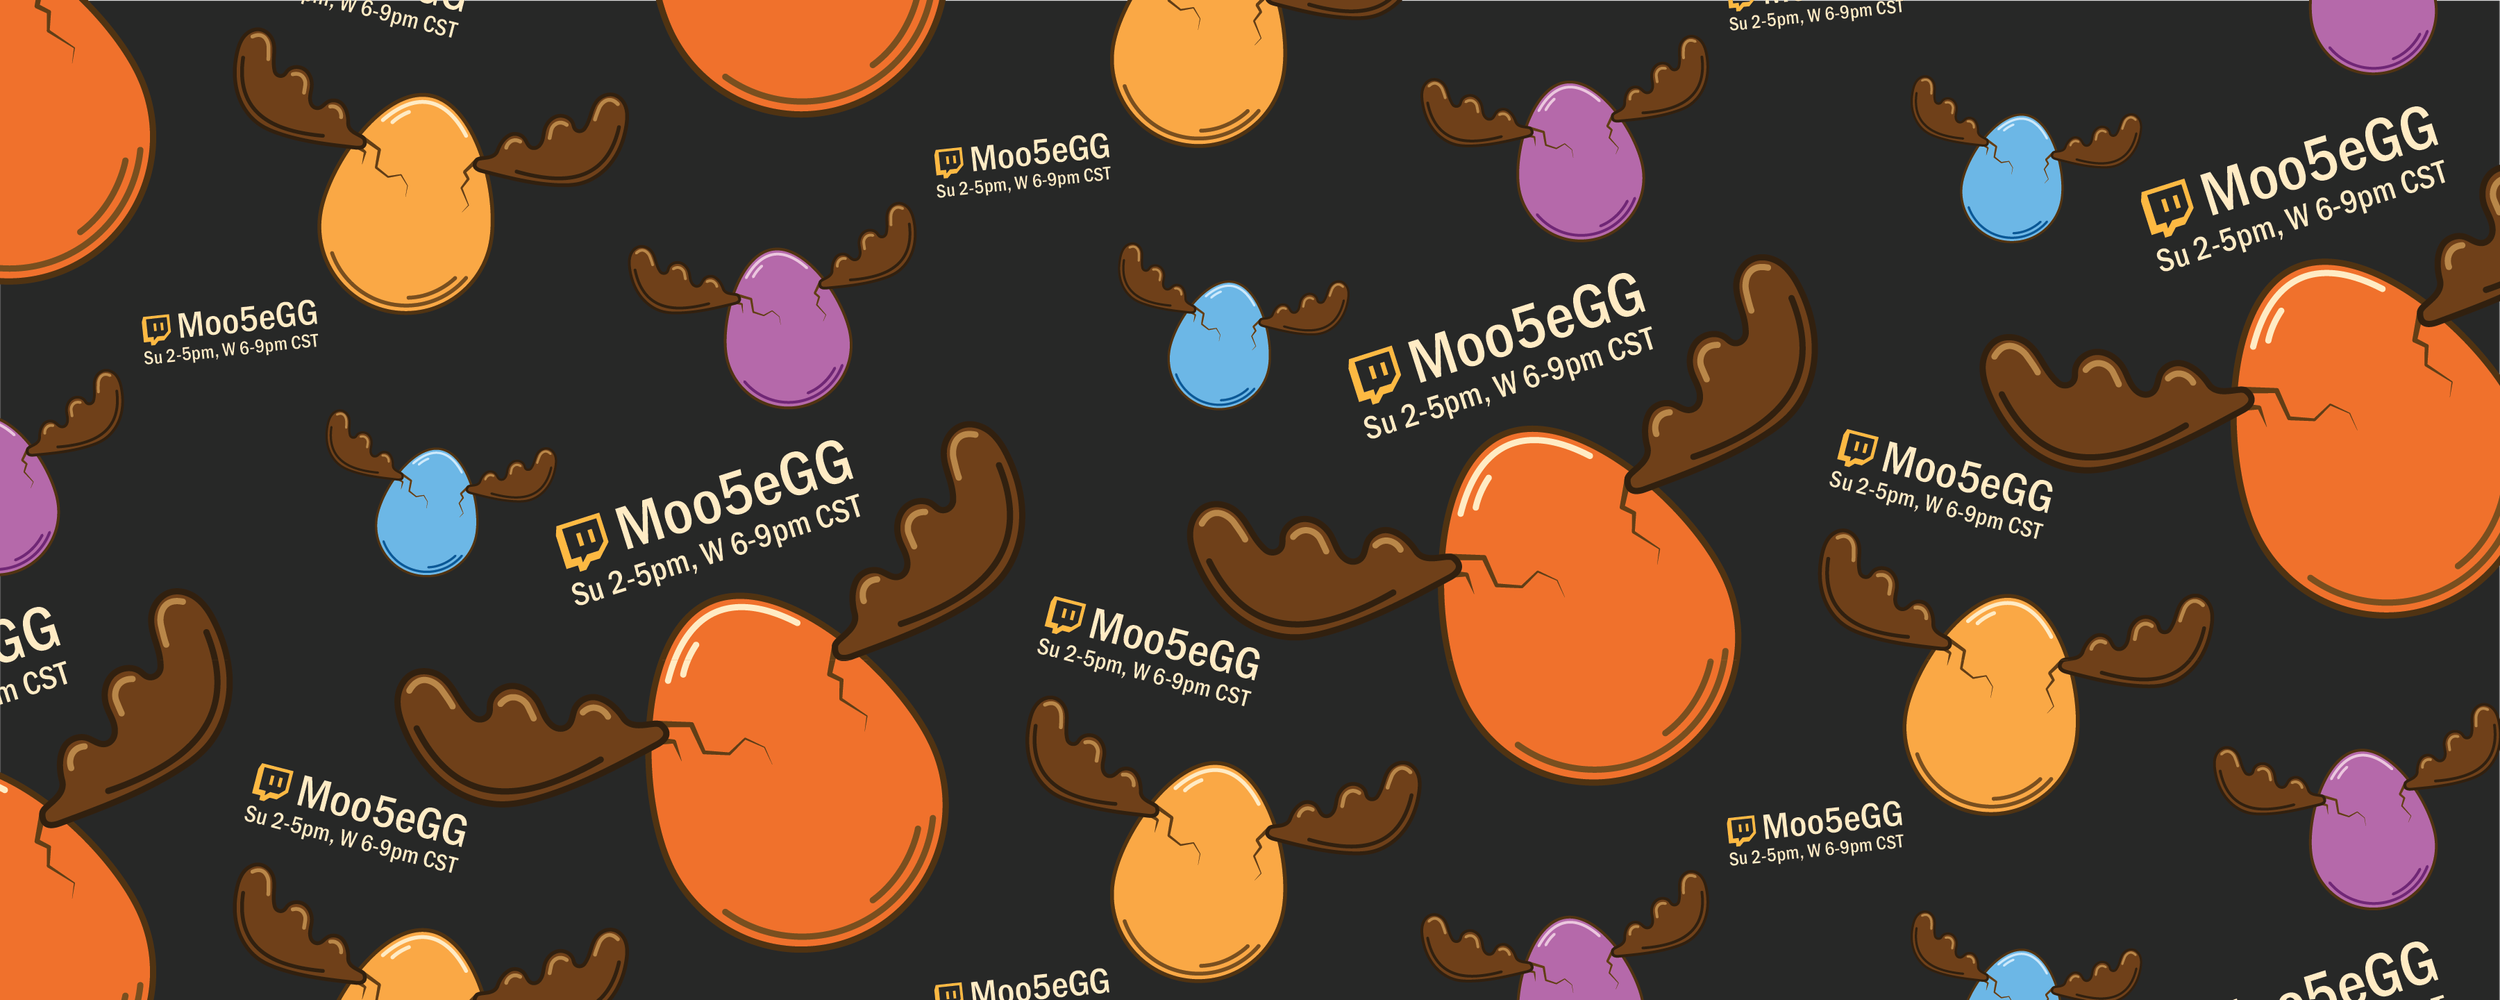 Banner Eggs@3x.png